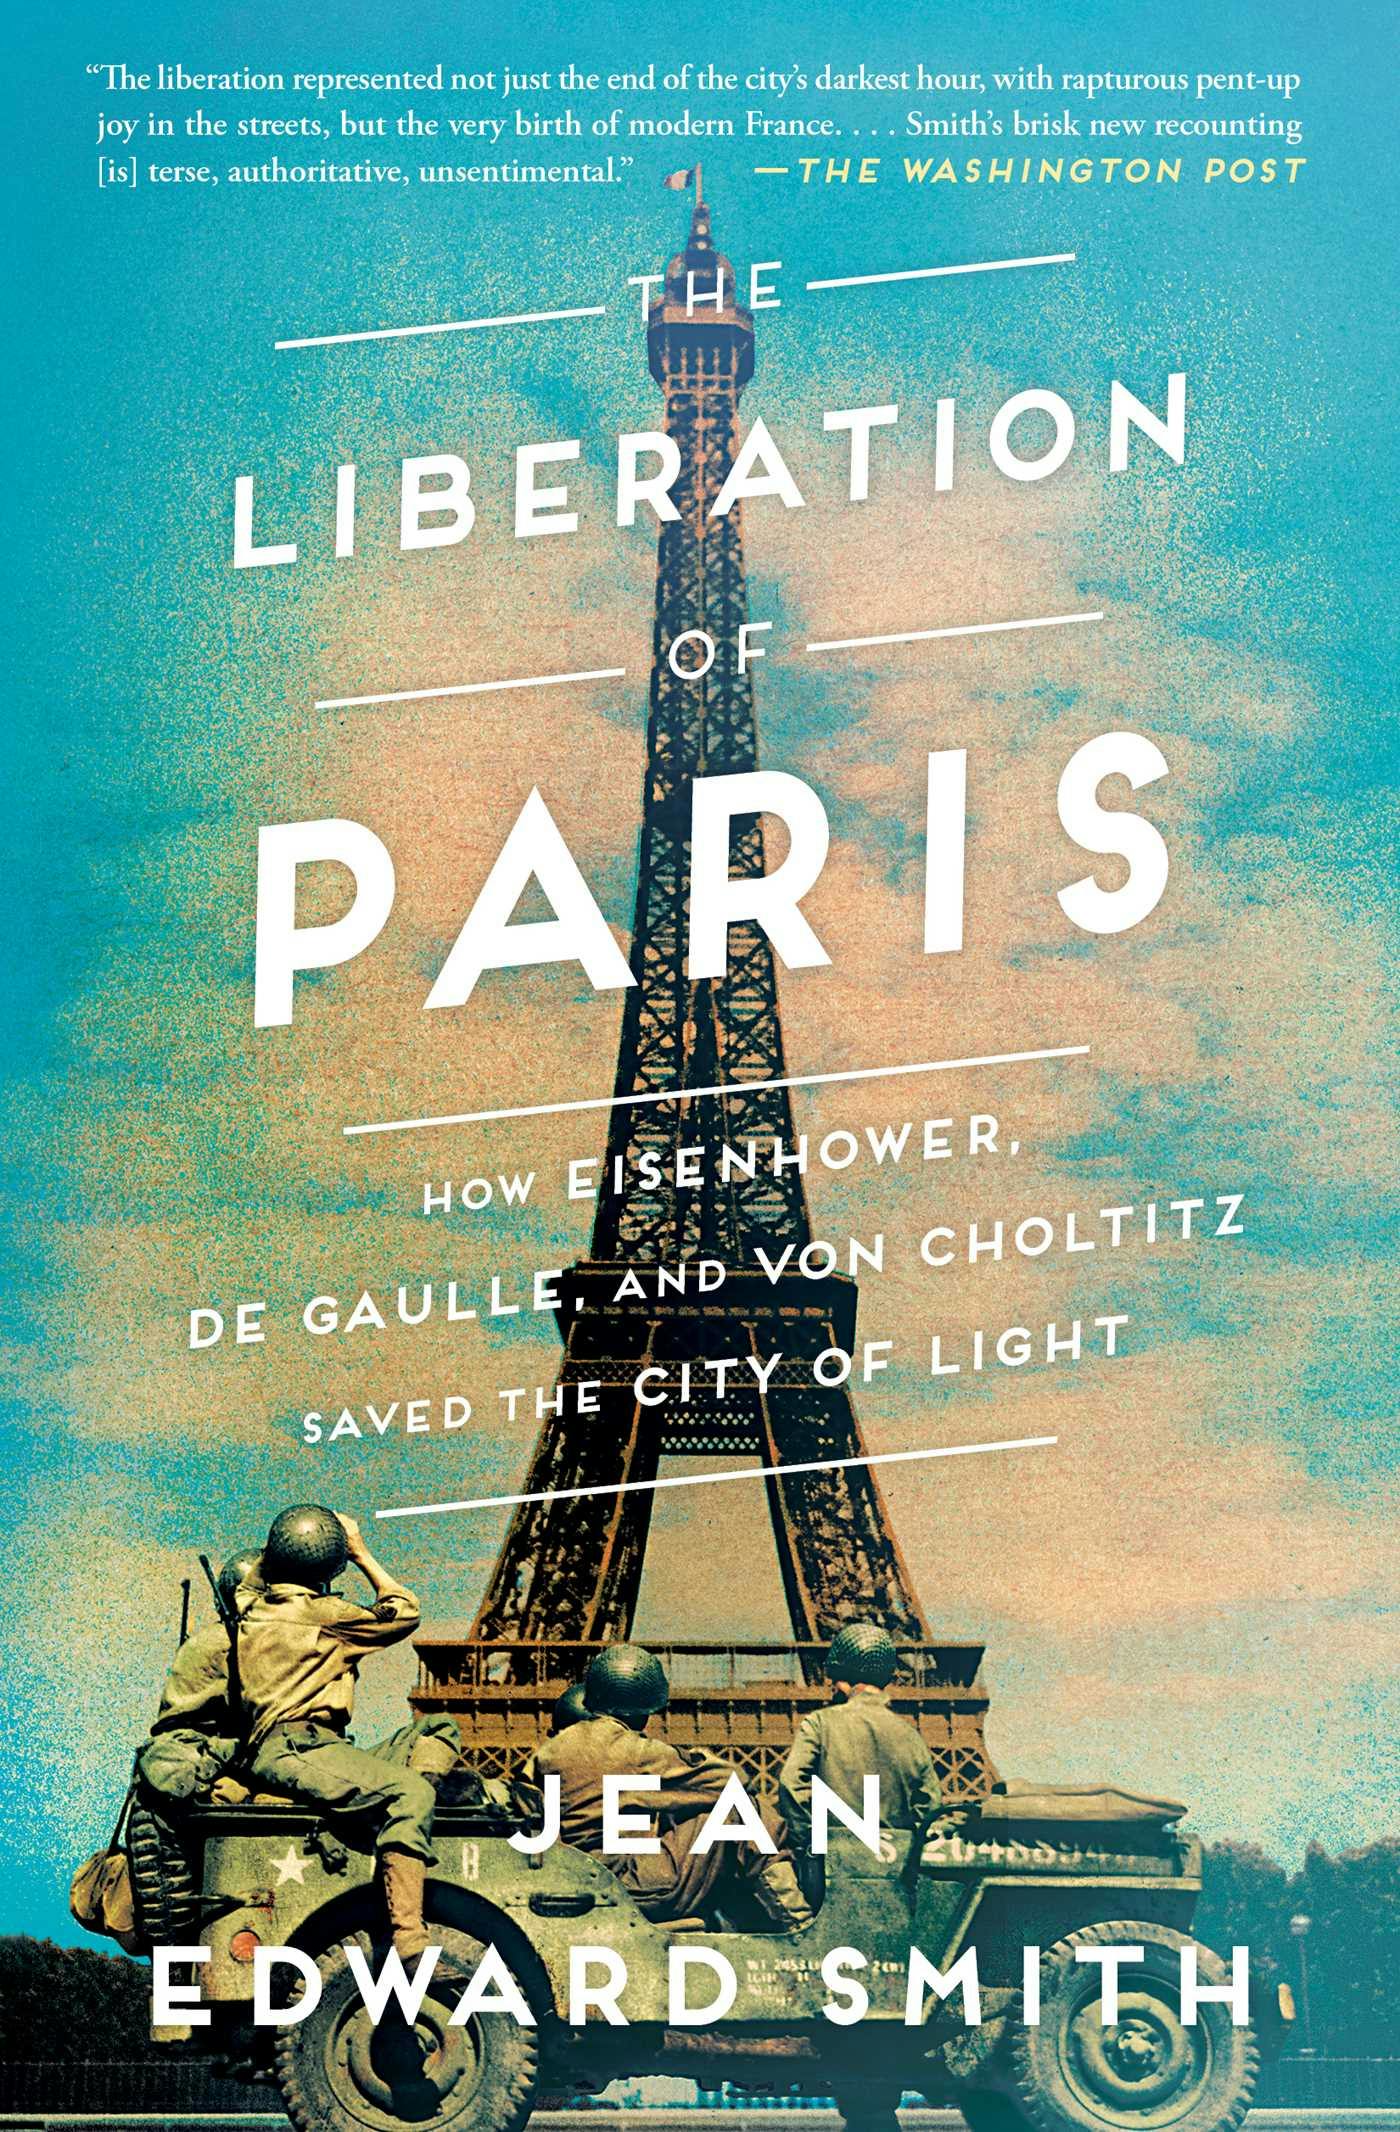 The Liberation of Paris: How Eisenhower, de Gaulle, and von Choltitz Saved the City of Light - undefined